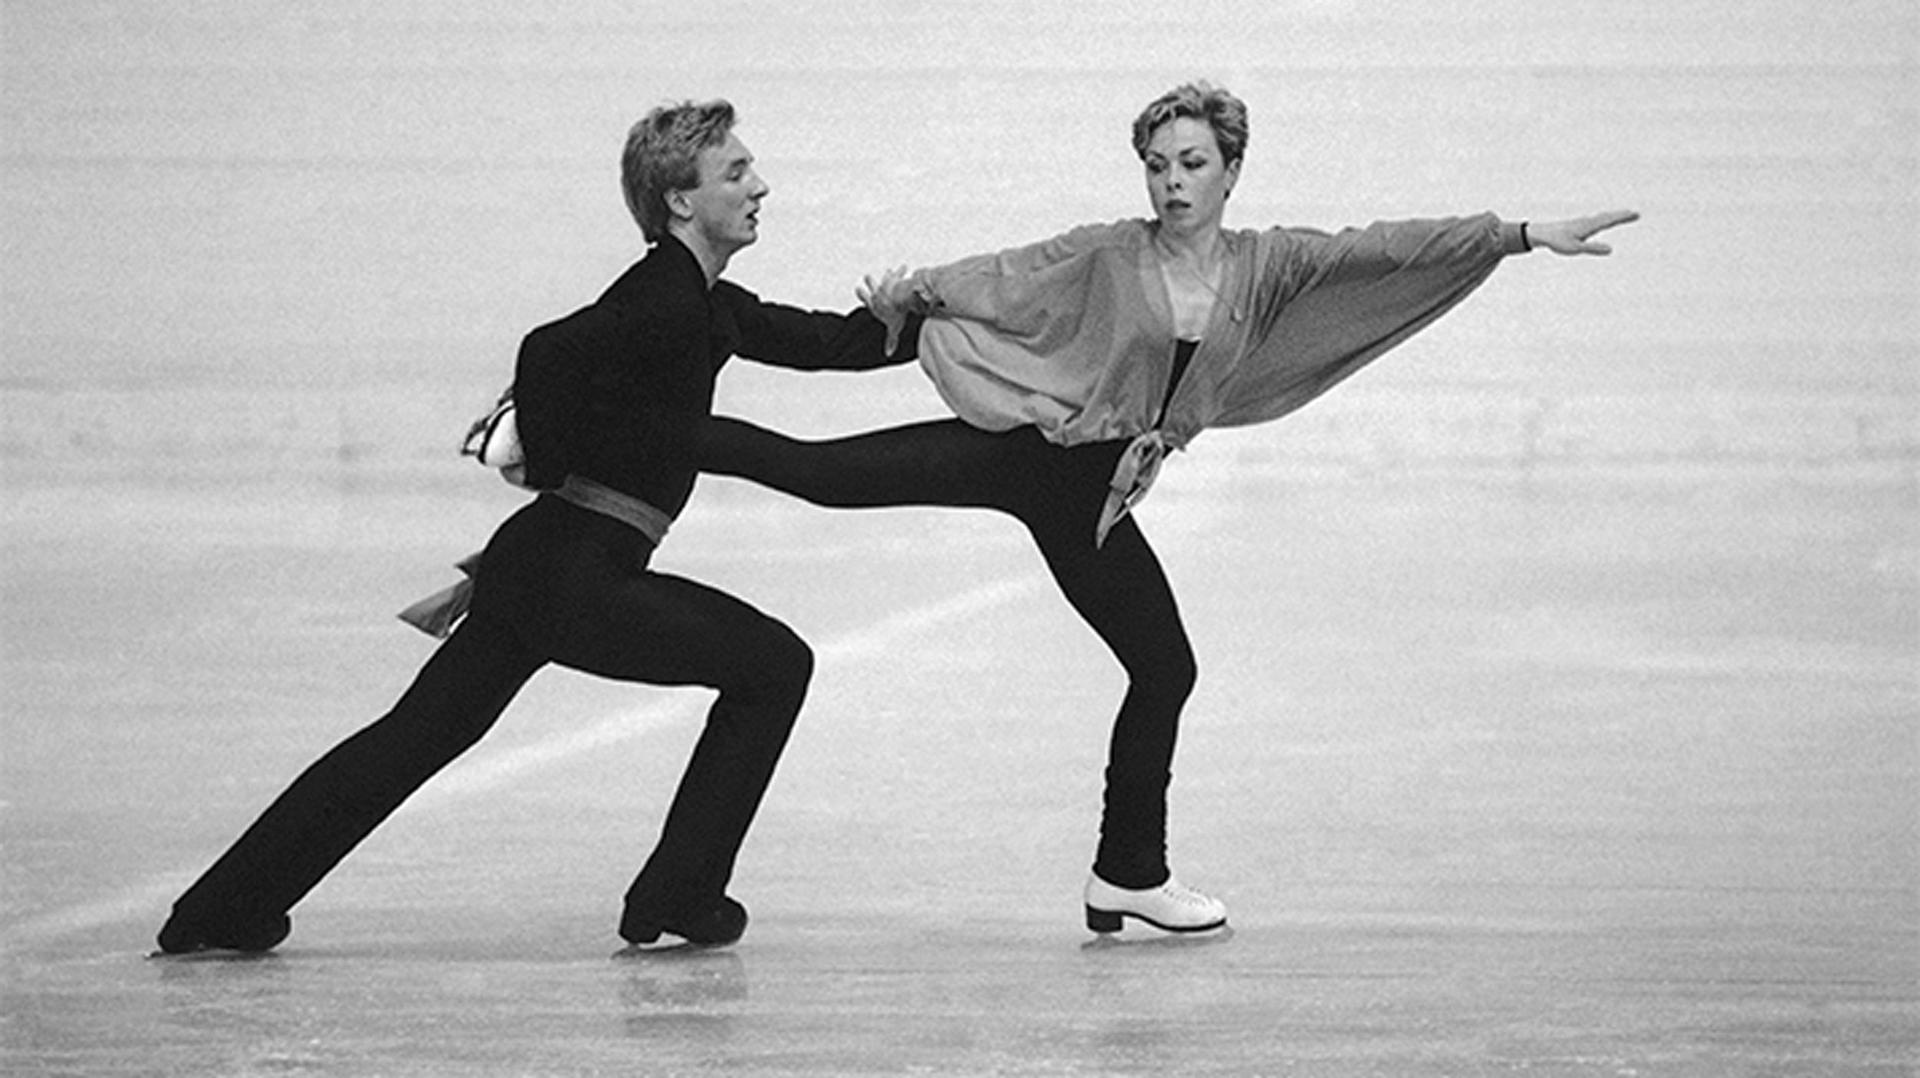 World champion ice dancers Christopher Dean and Jayne Torvill of Great Britain are shown during their first workout, a few hours after they arrived for the Winter Olympic Games in Sarajevo